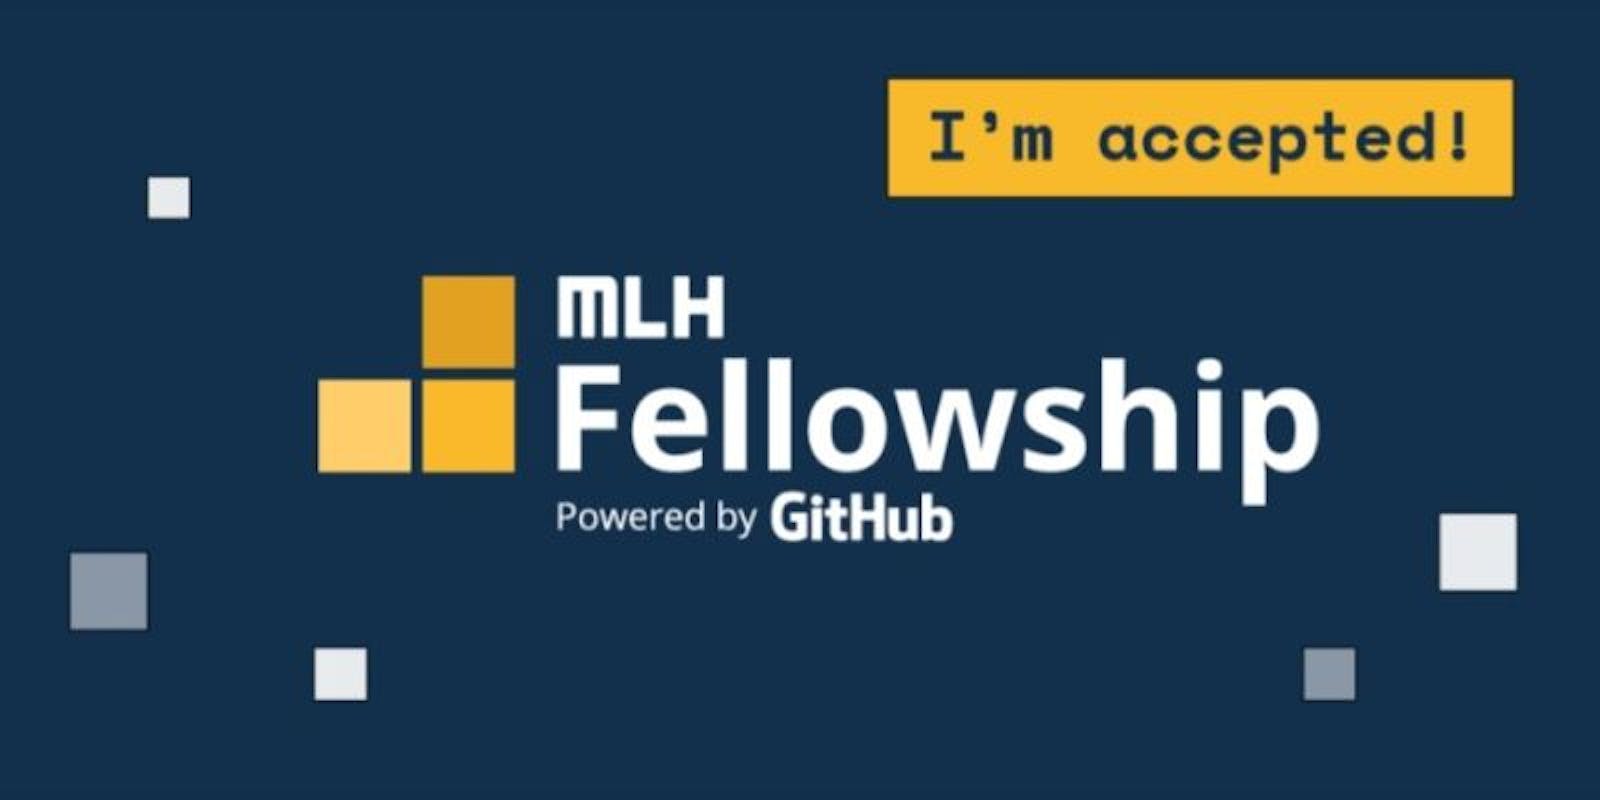 MLH Fellowship: My Interview Experience after 2 rejections